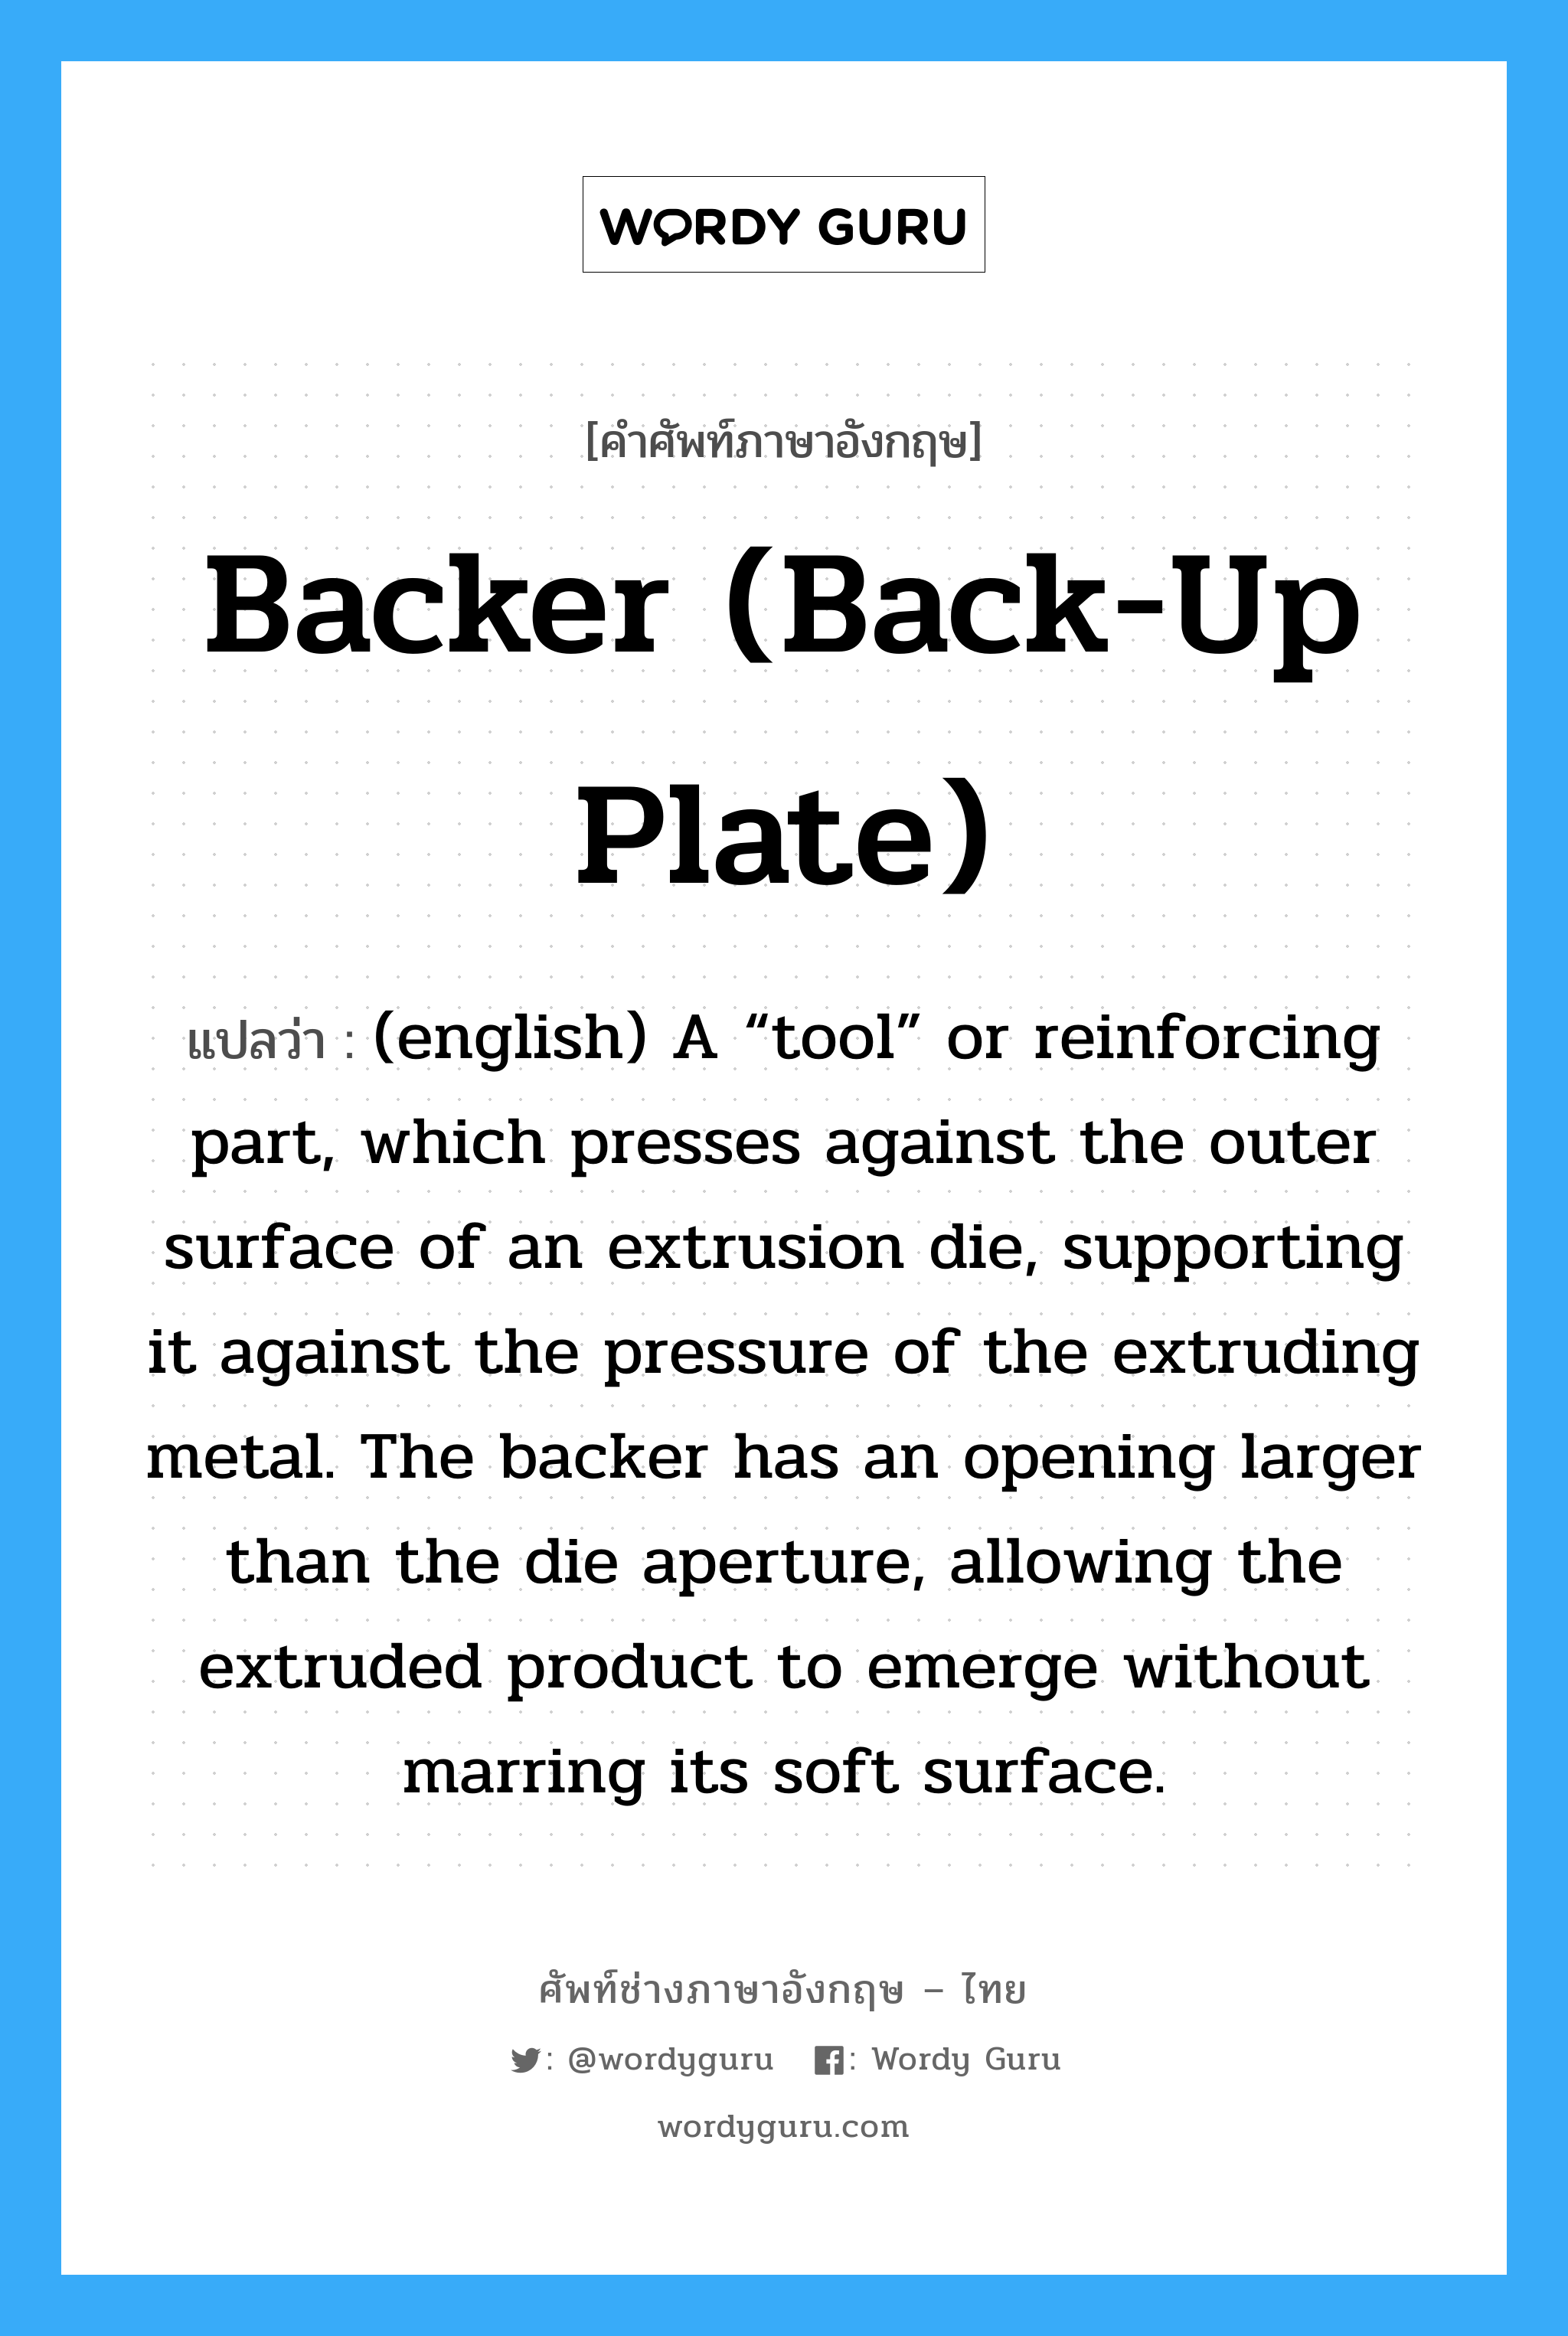 Backer (back-up plate) แปลว่า?, คำศัพท์ช่างภาษาอังกฤษ - ไทย Backer (back-up plate) คำศัพท์ภาษาอังกฤษ Backer (back-up plate) แปลว่า (english) A “tool” or reinforcing part, which presses against the outer surface of an extrusion die, supporting it against the pressure of the extruding metal. The backer has an opening larger than the die aperture, allowing the extruded product to emerge without marring its soft surface.